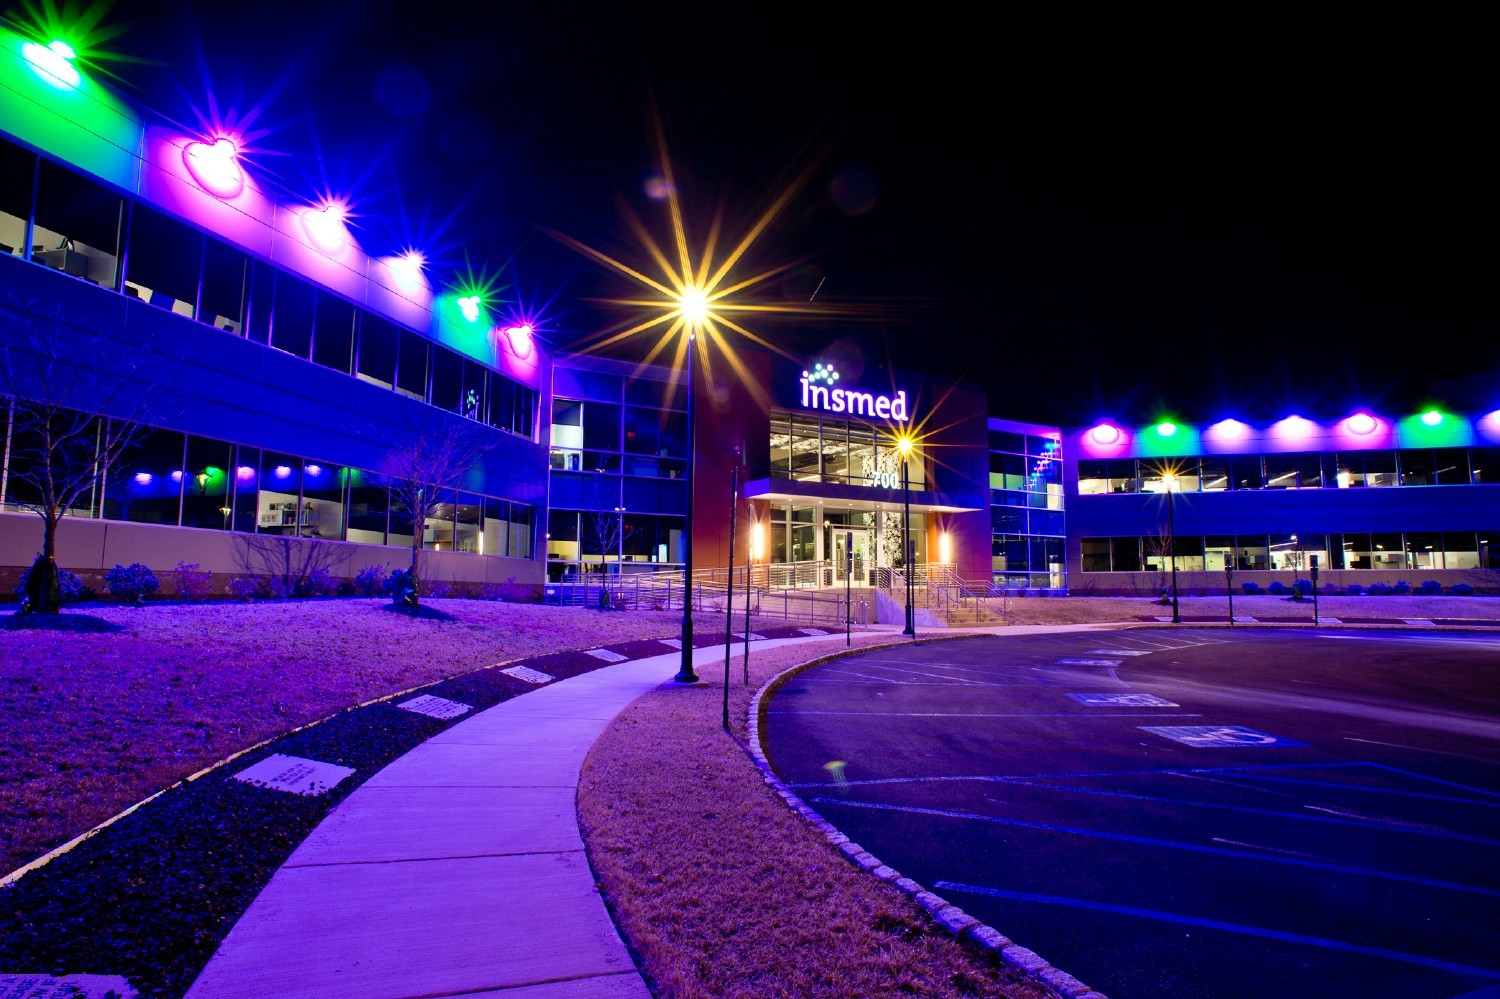 Insmed's global headquarters in Bridgewater, New Jersey lit up for Rare Disease Day